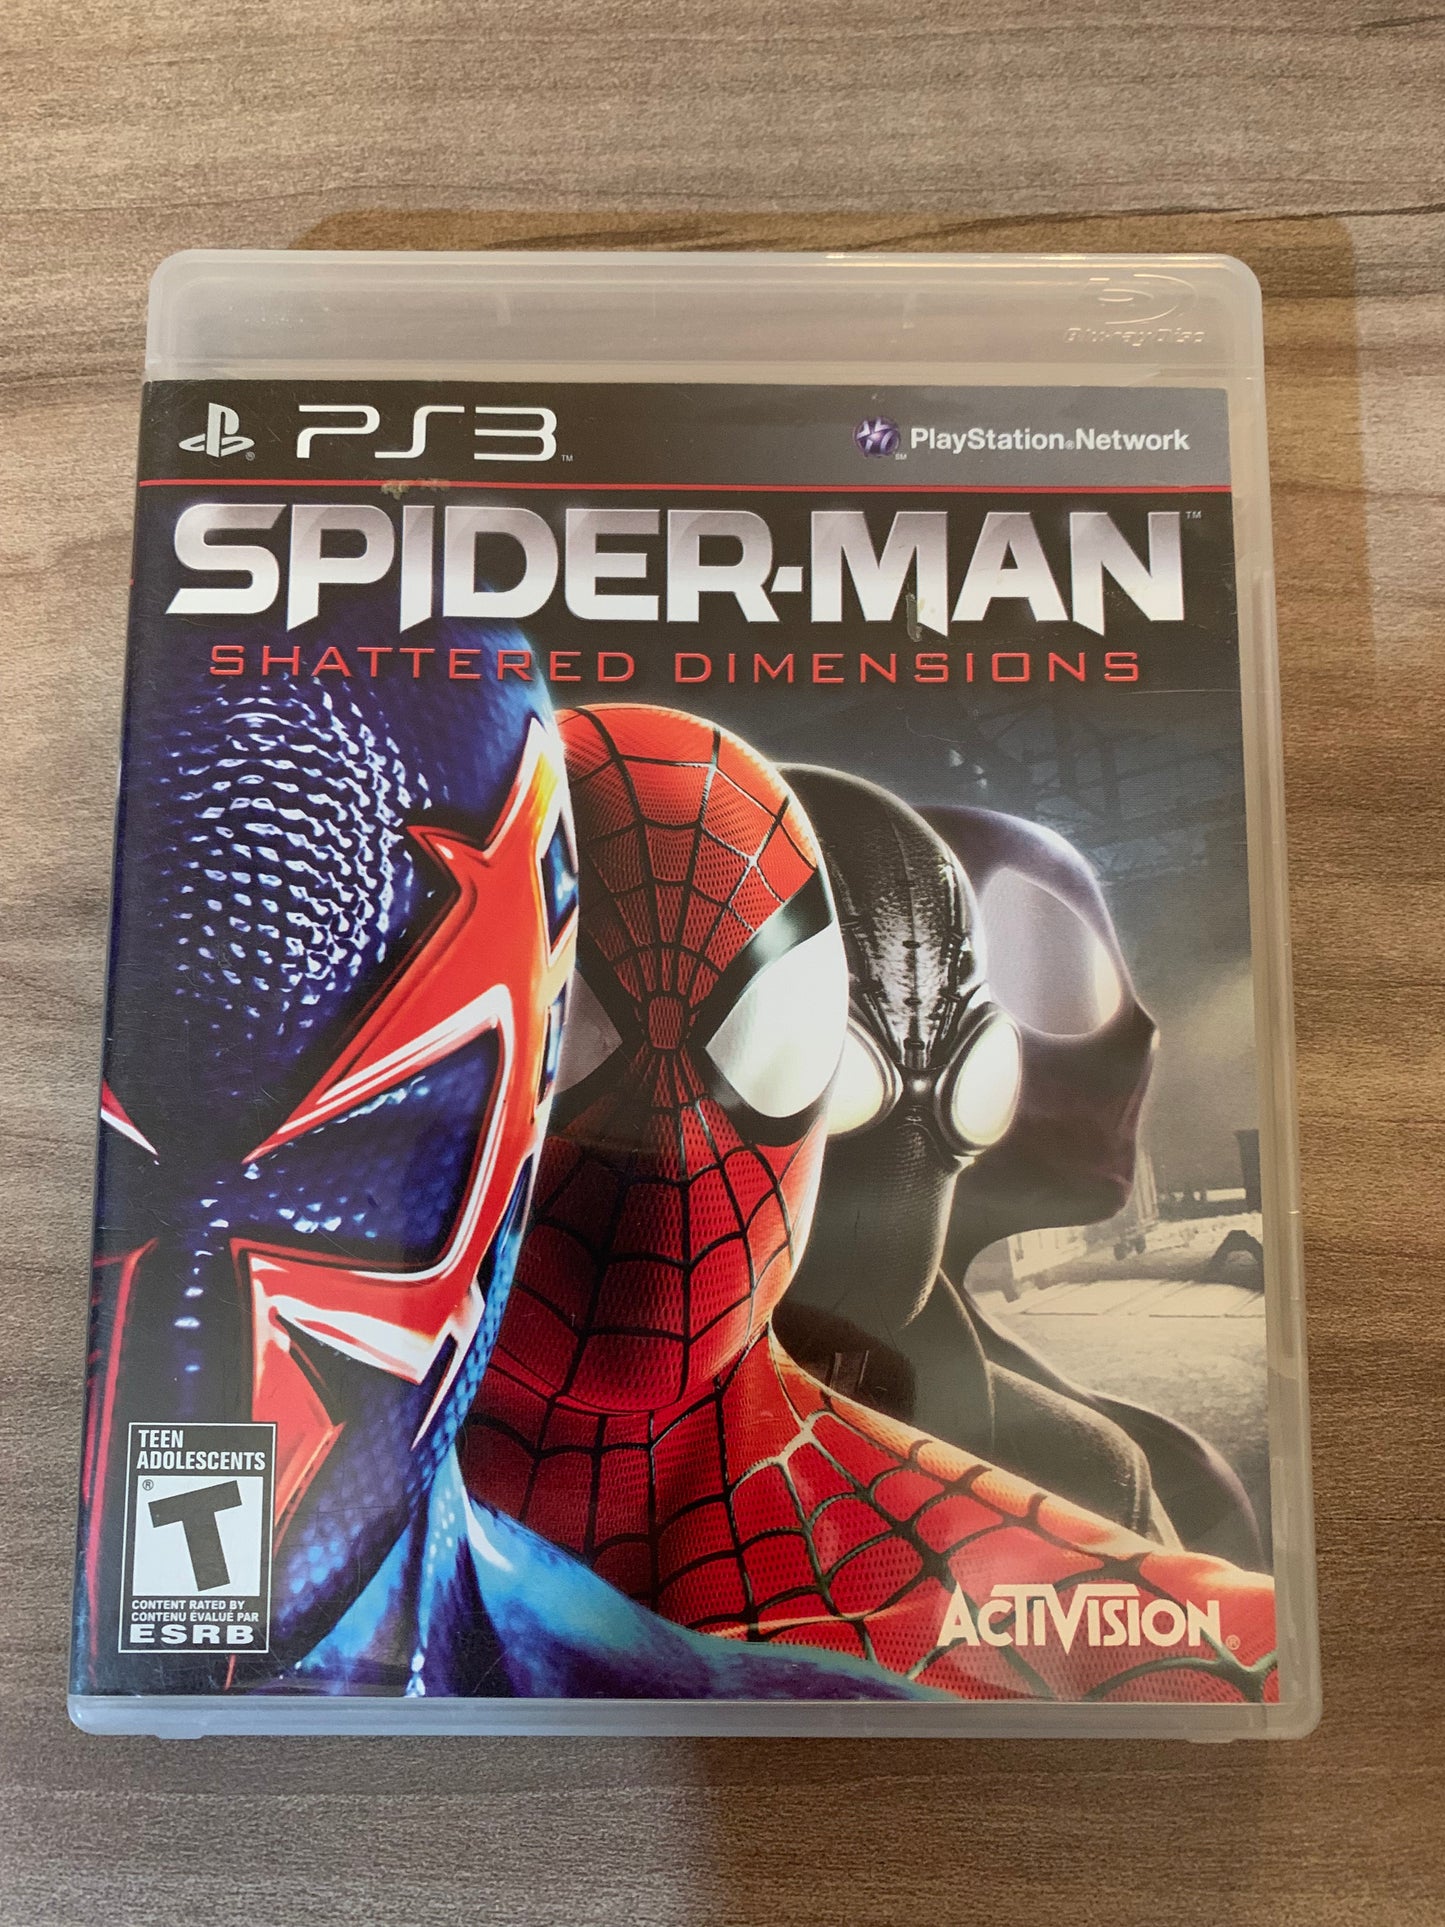 SONY PLAYSTATiON 3 [PS3] | SPiDER-MAN SHATTERED DiMENSiONS